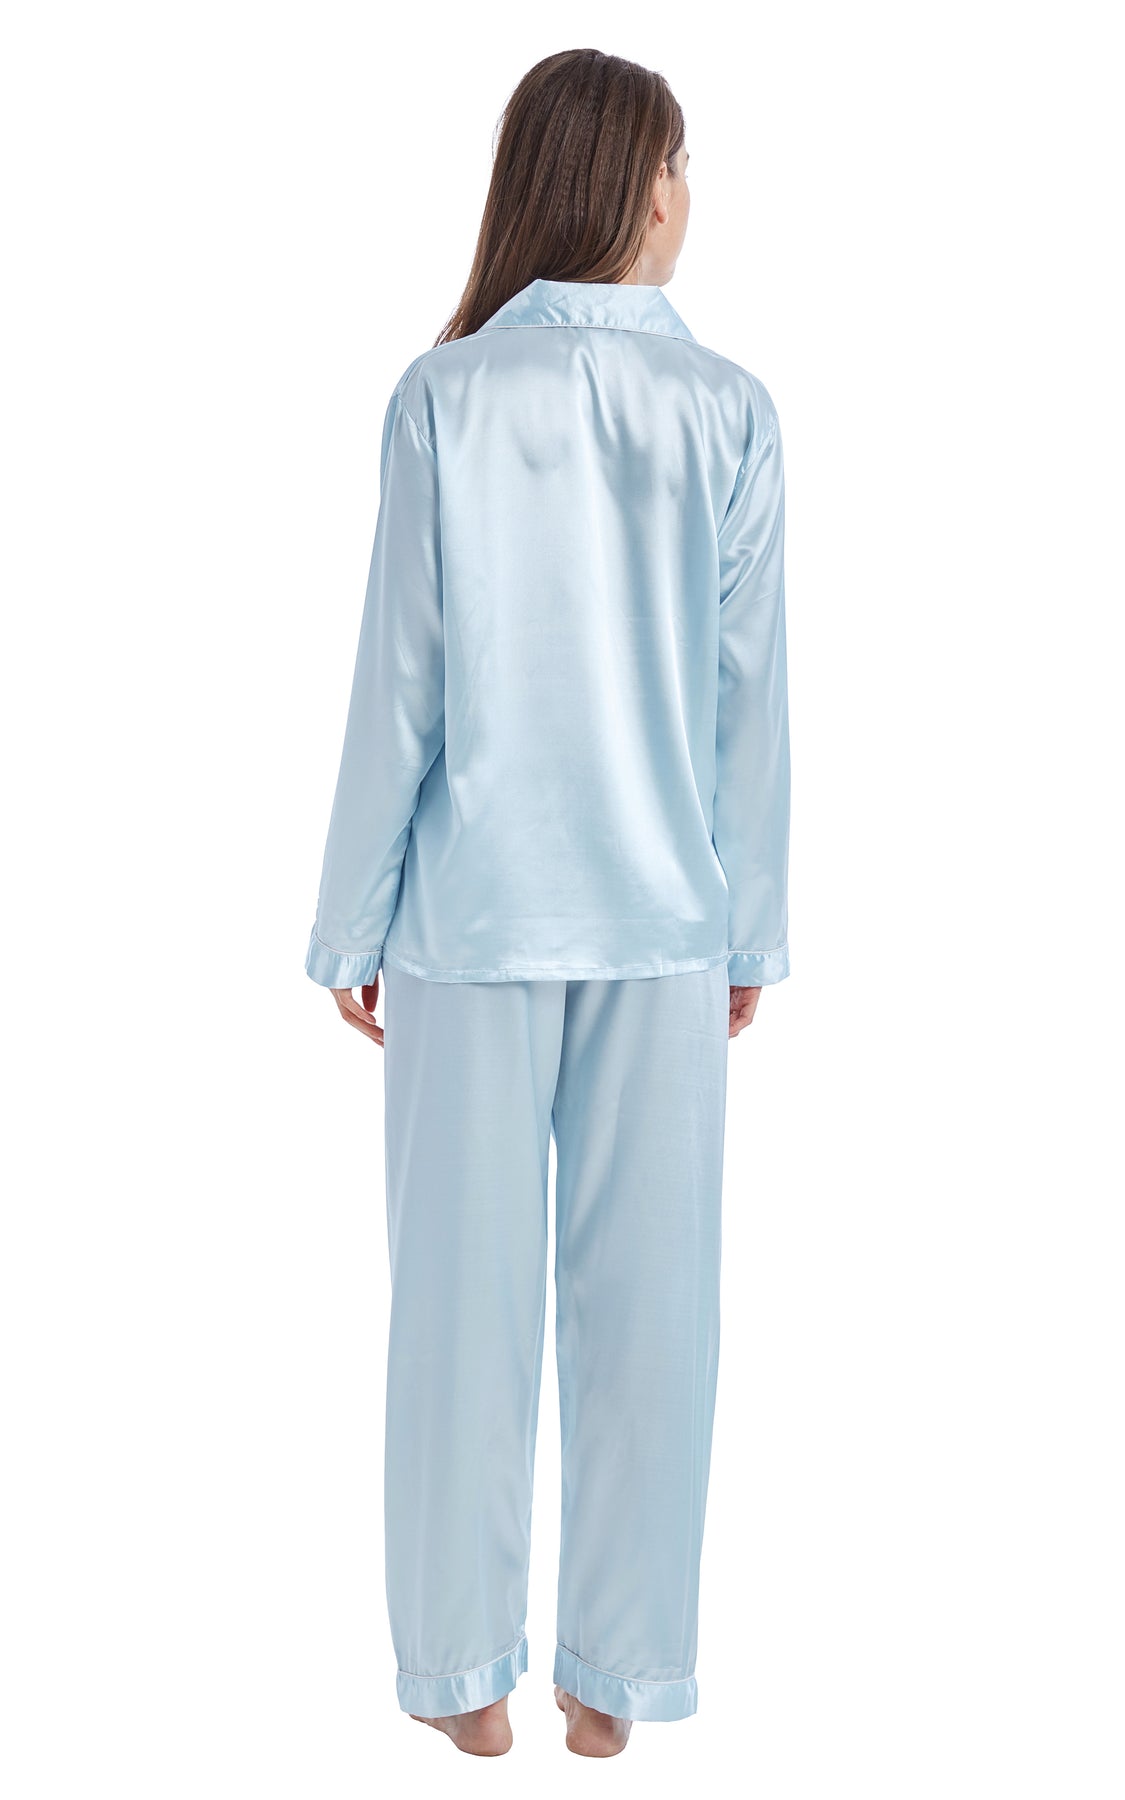 Womens Silk Satin Pajama Set Long Sleeve Light Blue With White Piping Tony And Candice 